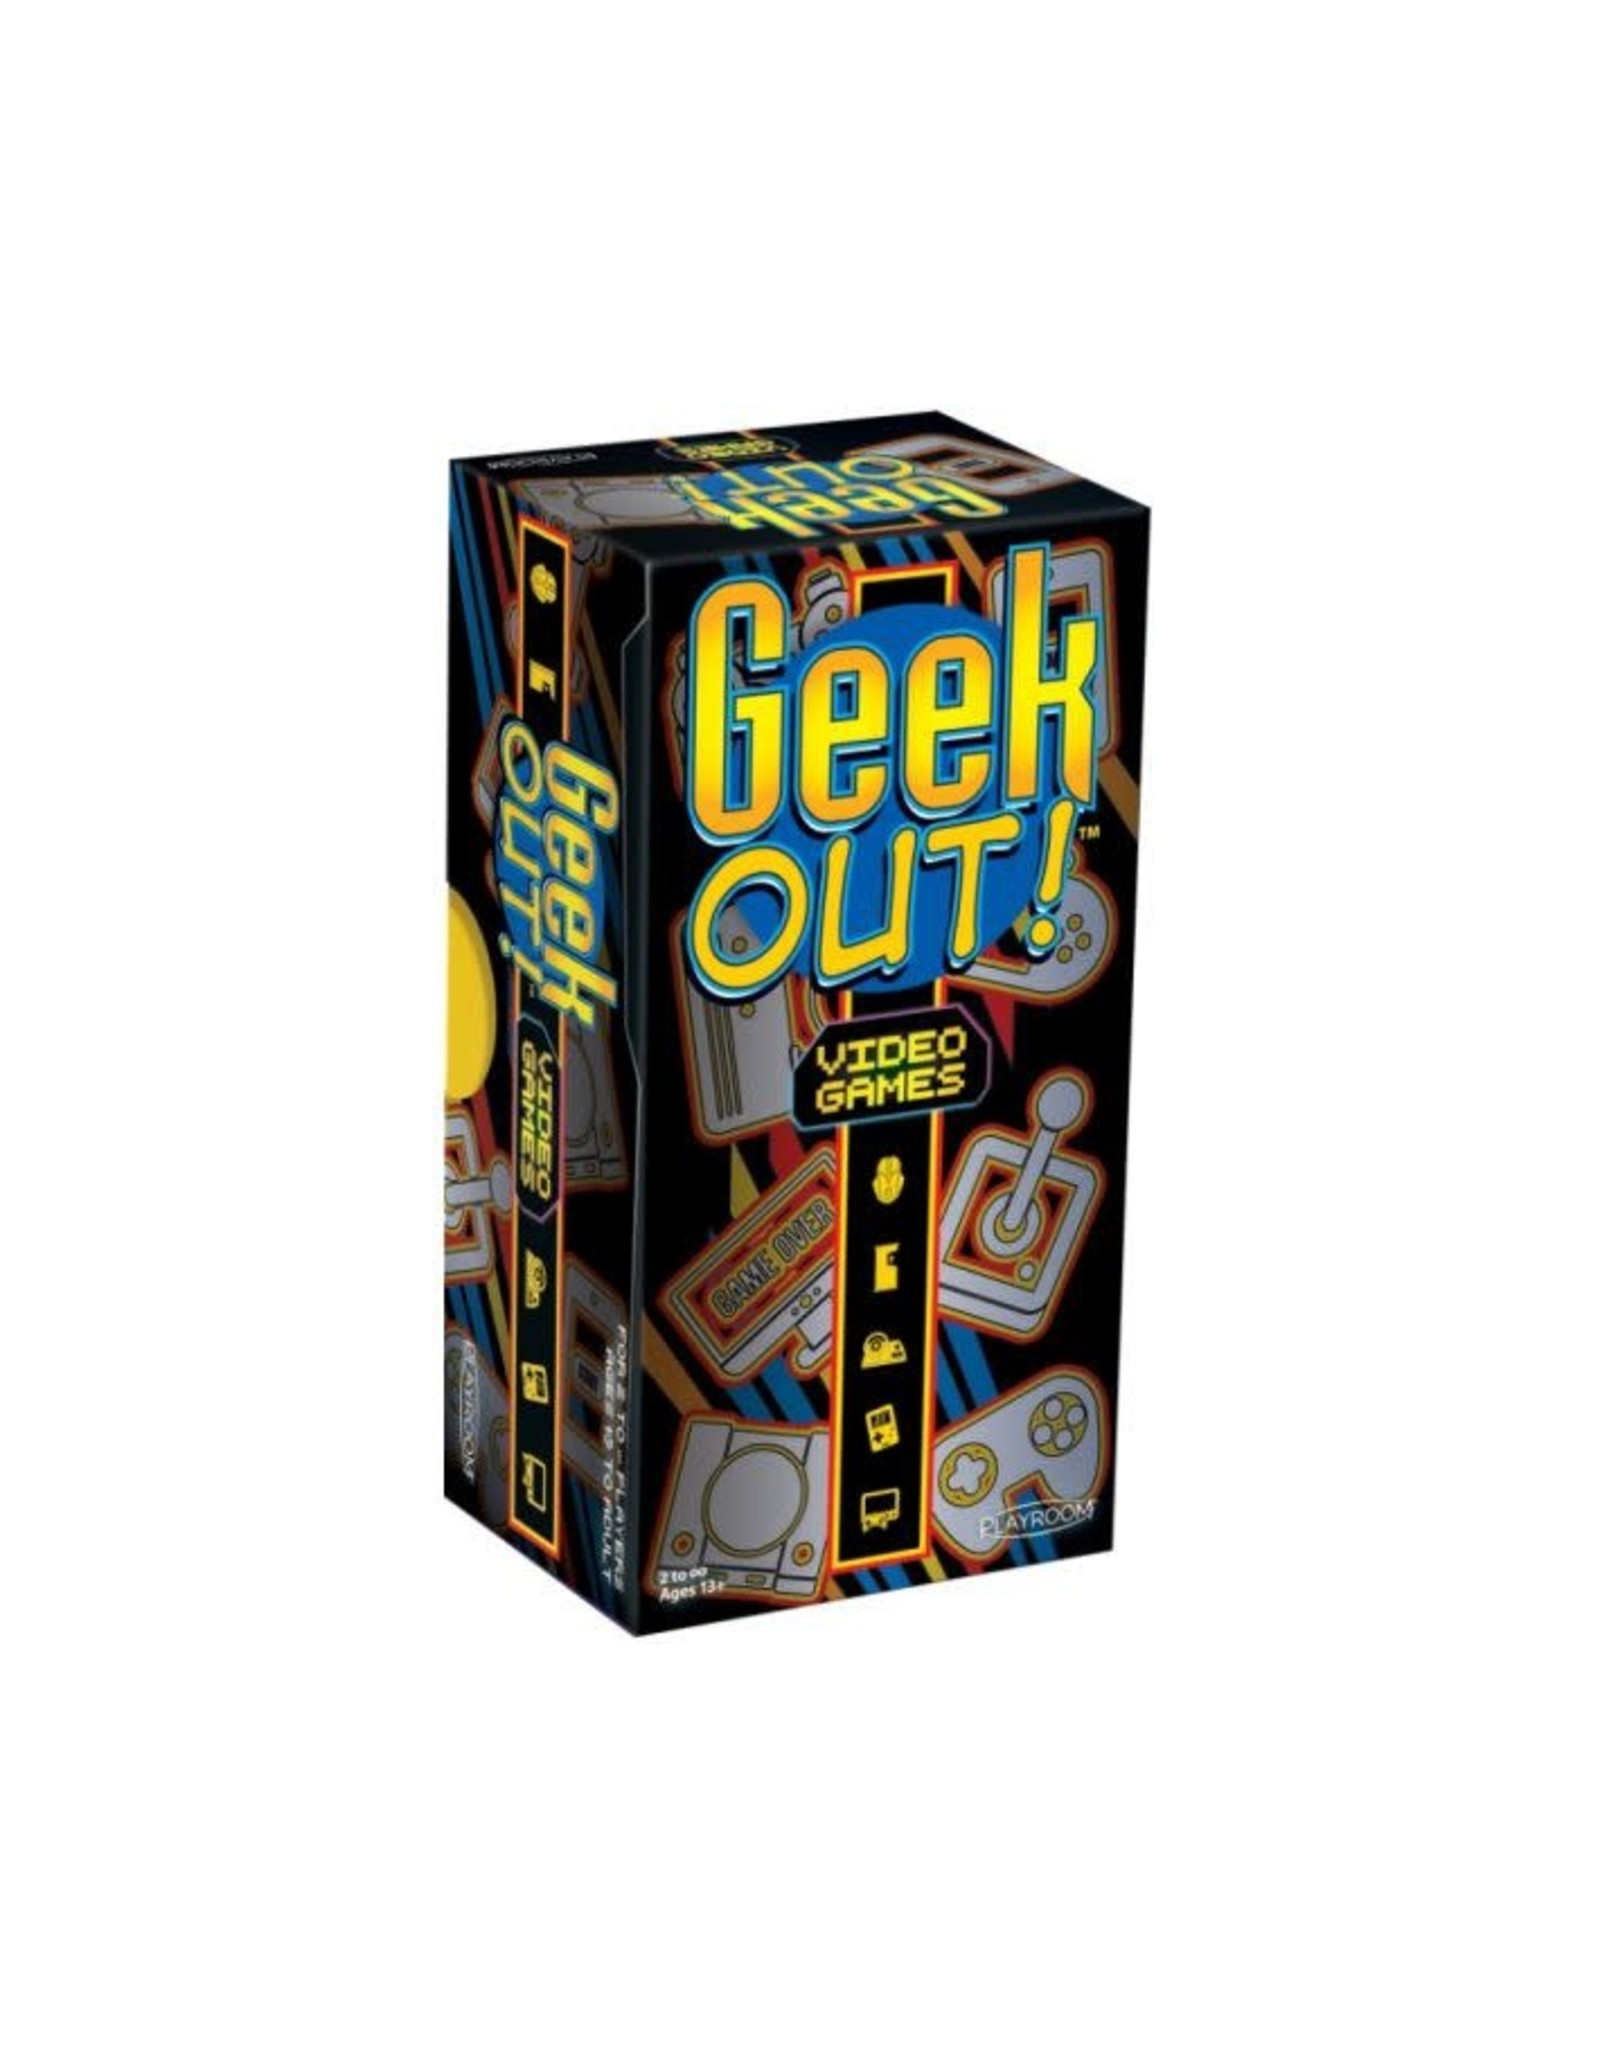 Geek Out! Video Games